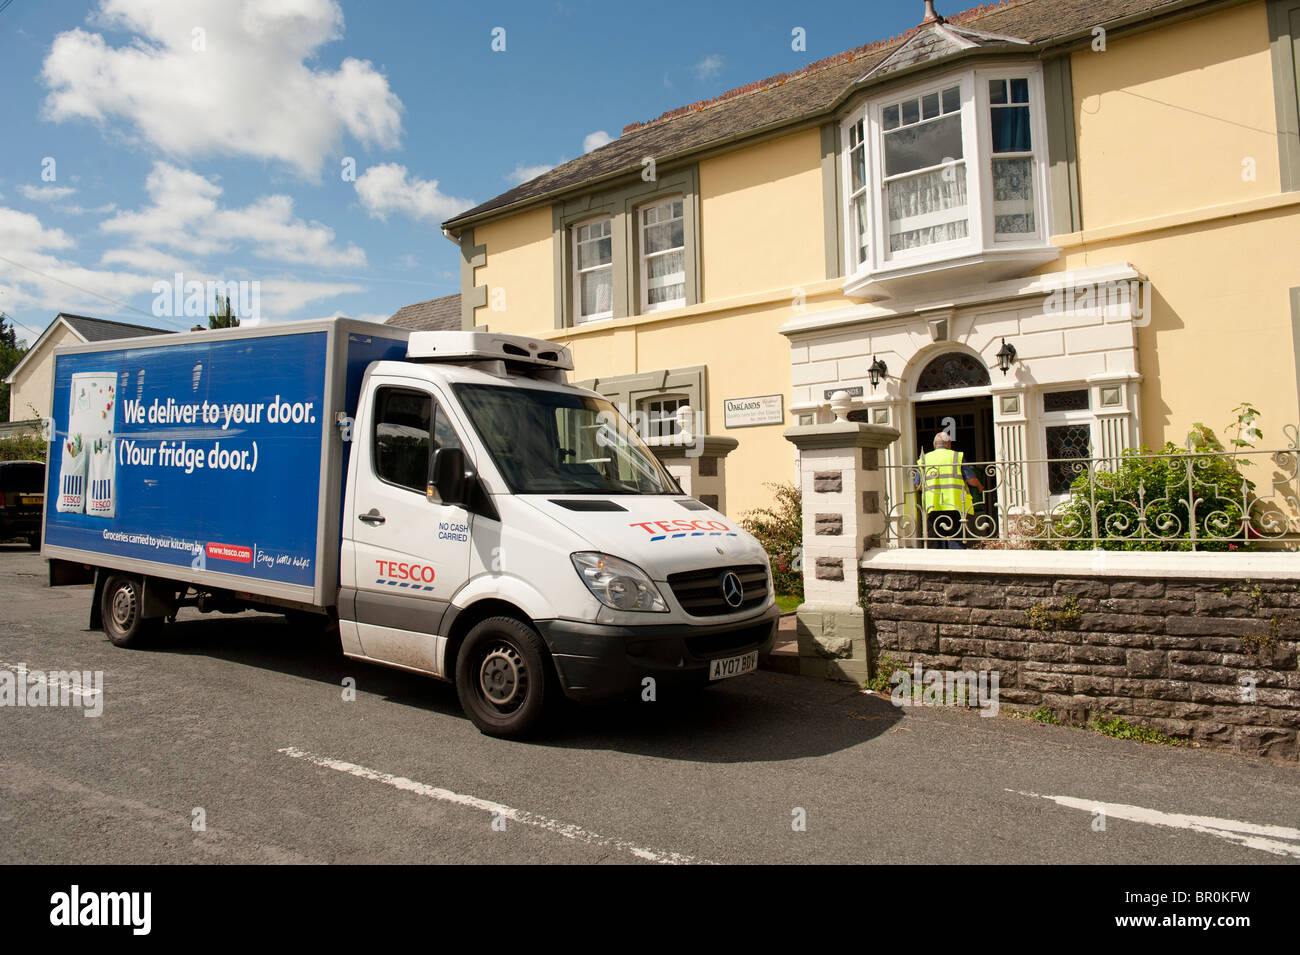 Tesco truck home food delivery service in Llangynidr, Powys, Wales UK Stock Photo